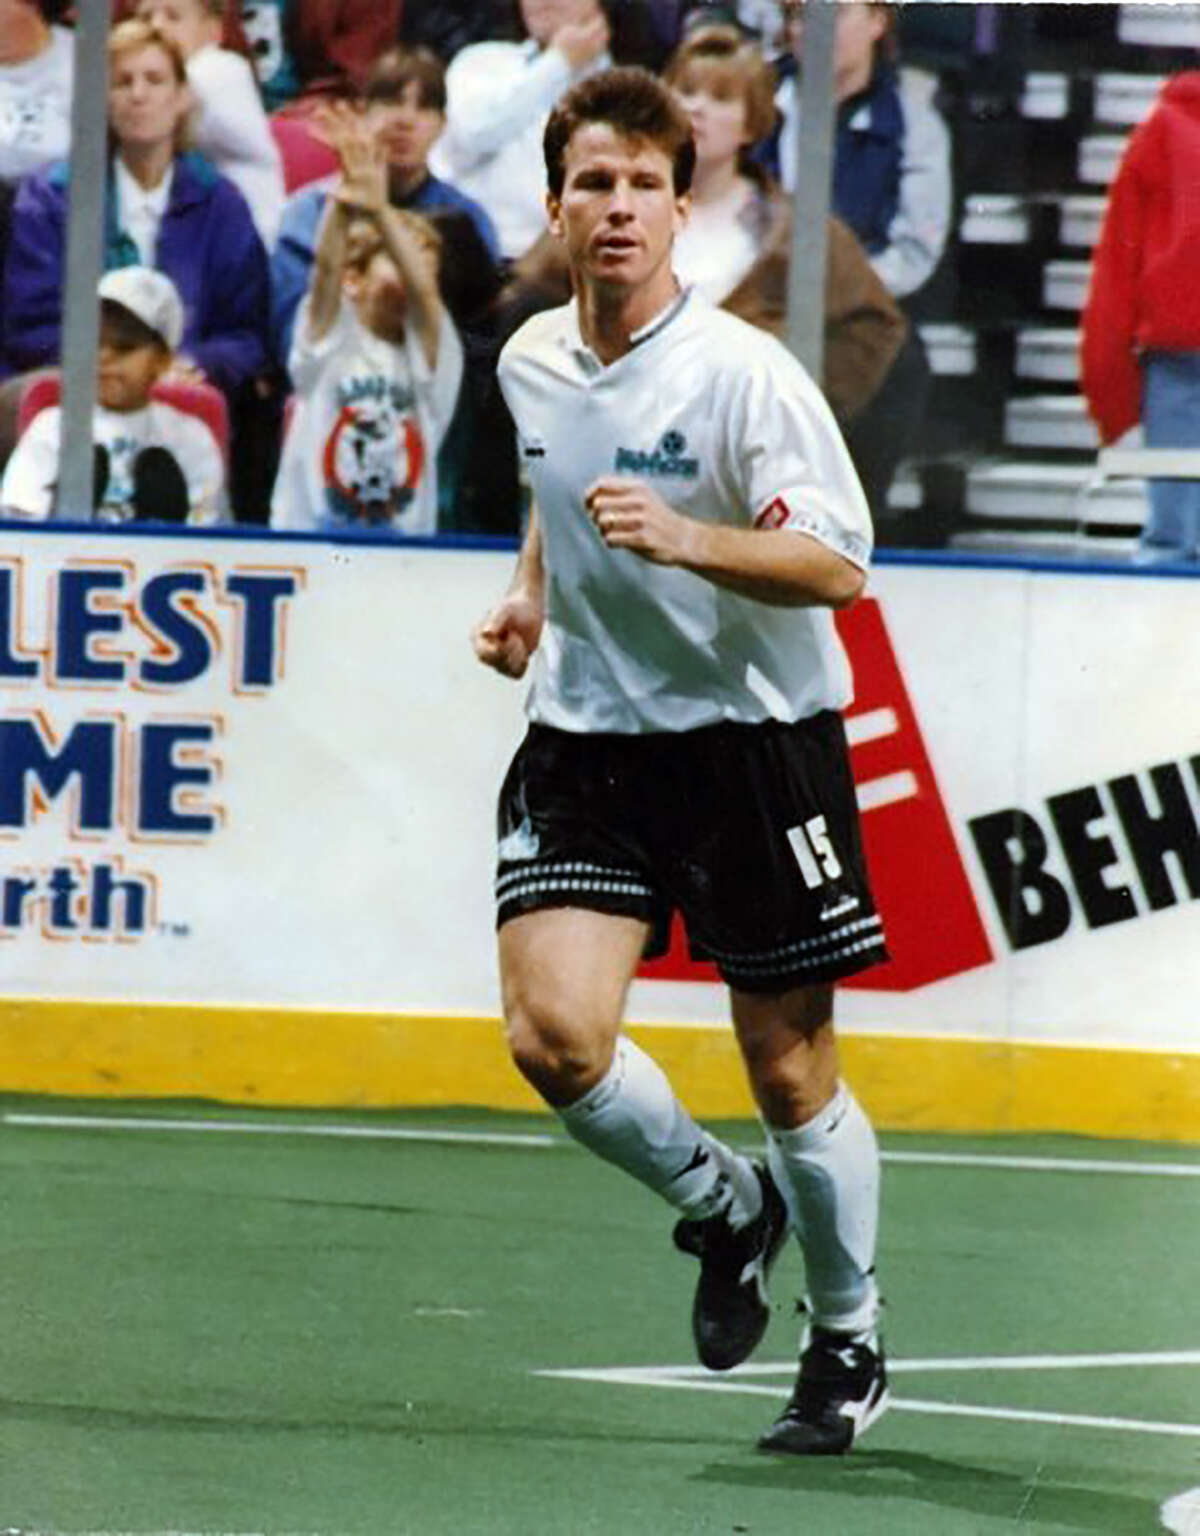 Mark Moser during his time as a player with the St. Louis Ambush professional indoor soccer team. Moser, a former Lewis and Clark All-America, has been named to the St. Louis Soccer Hall of Fame.